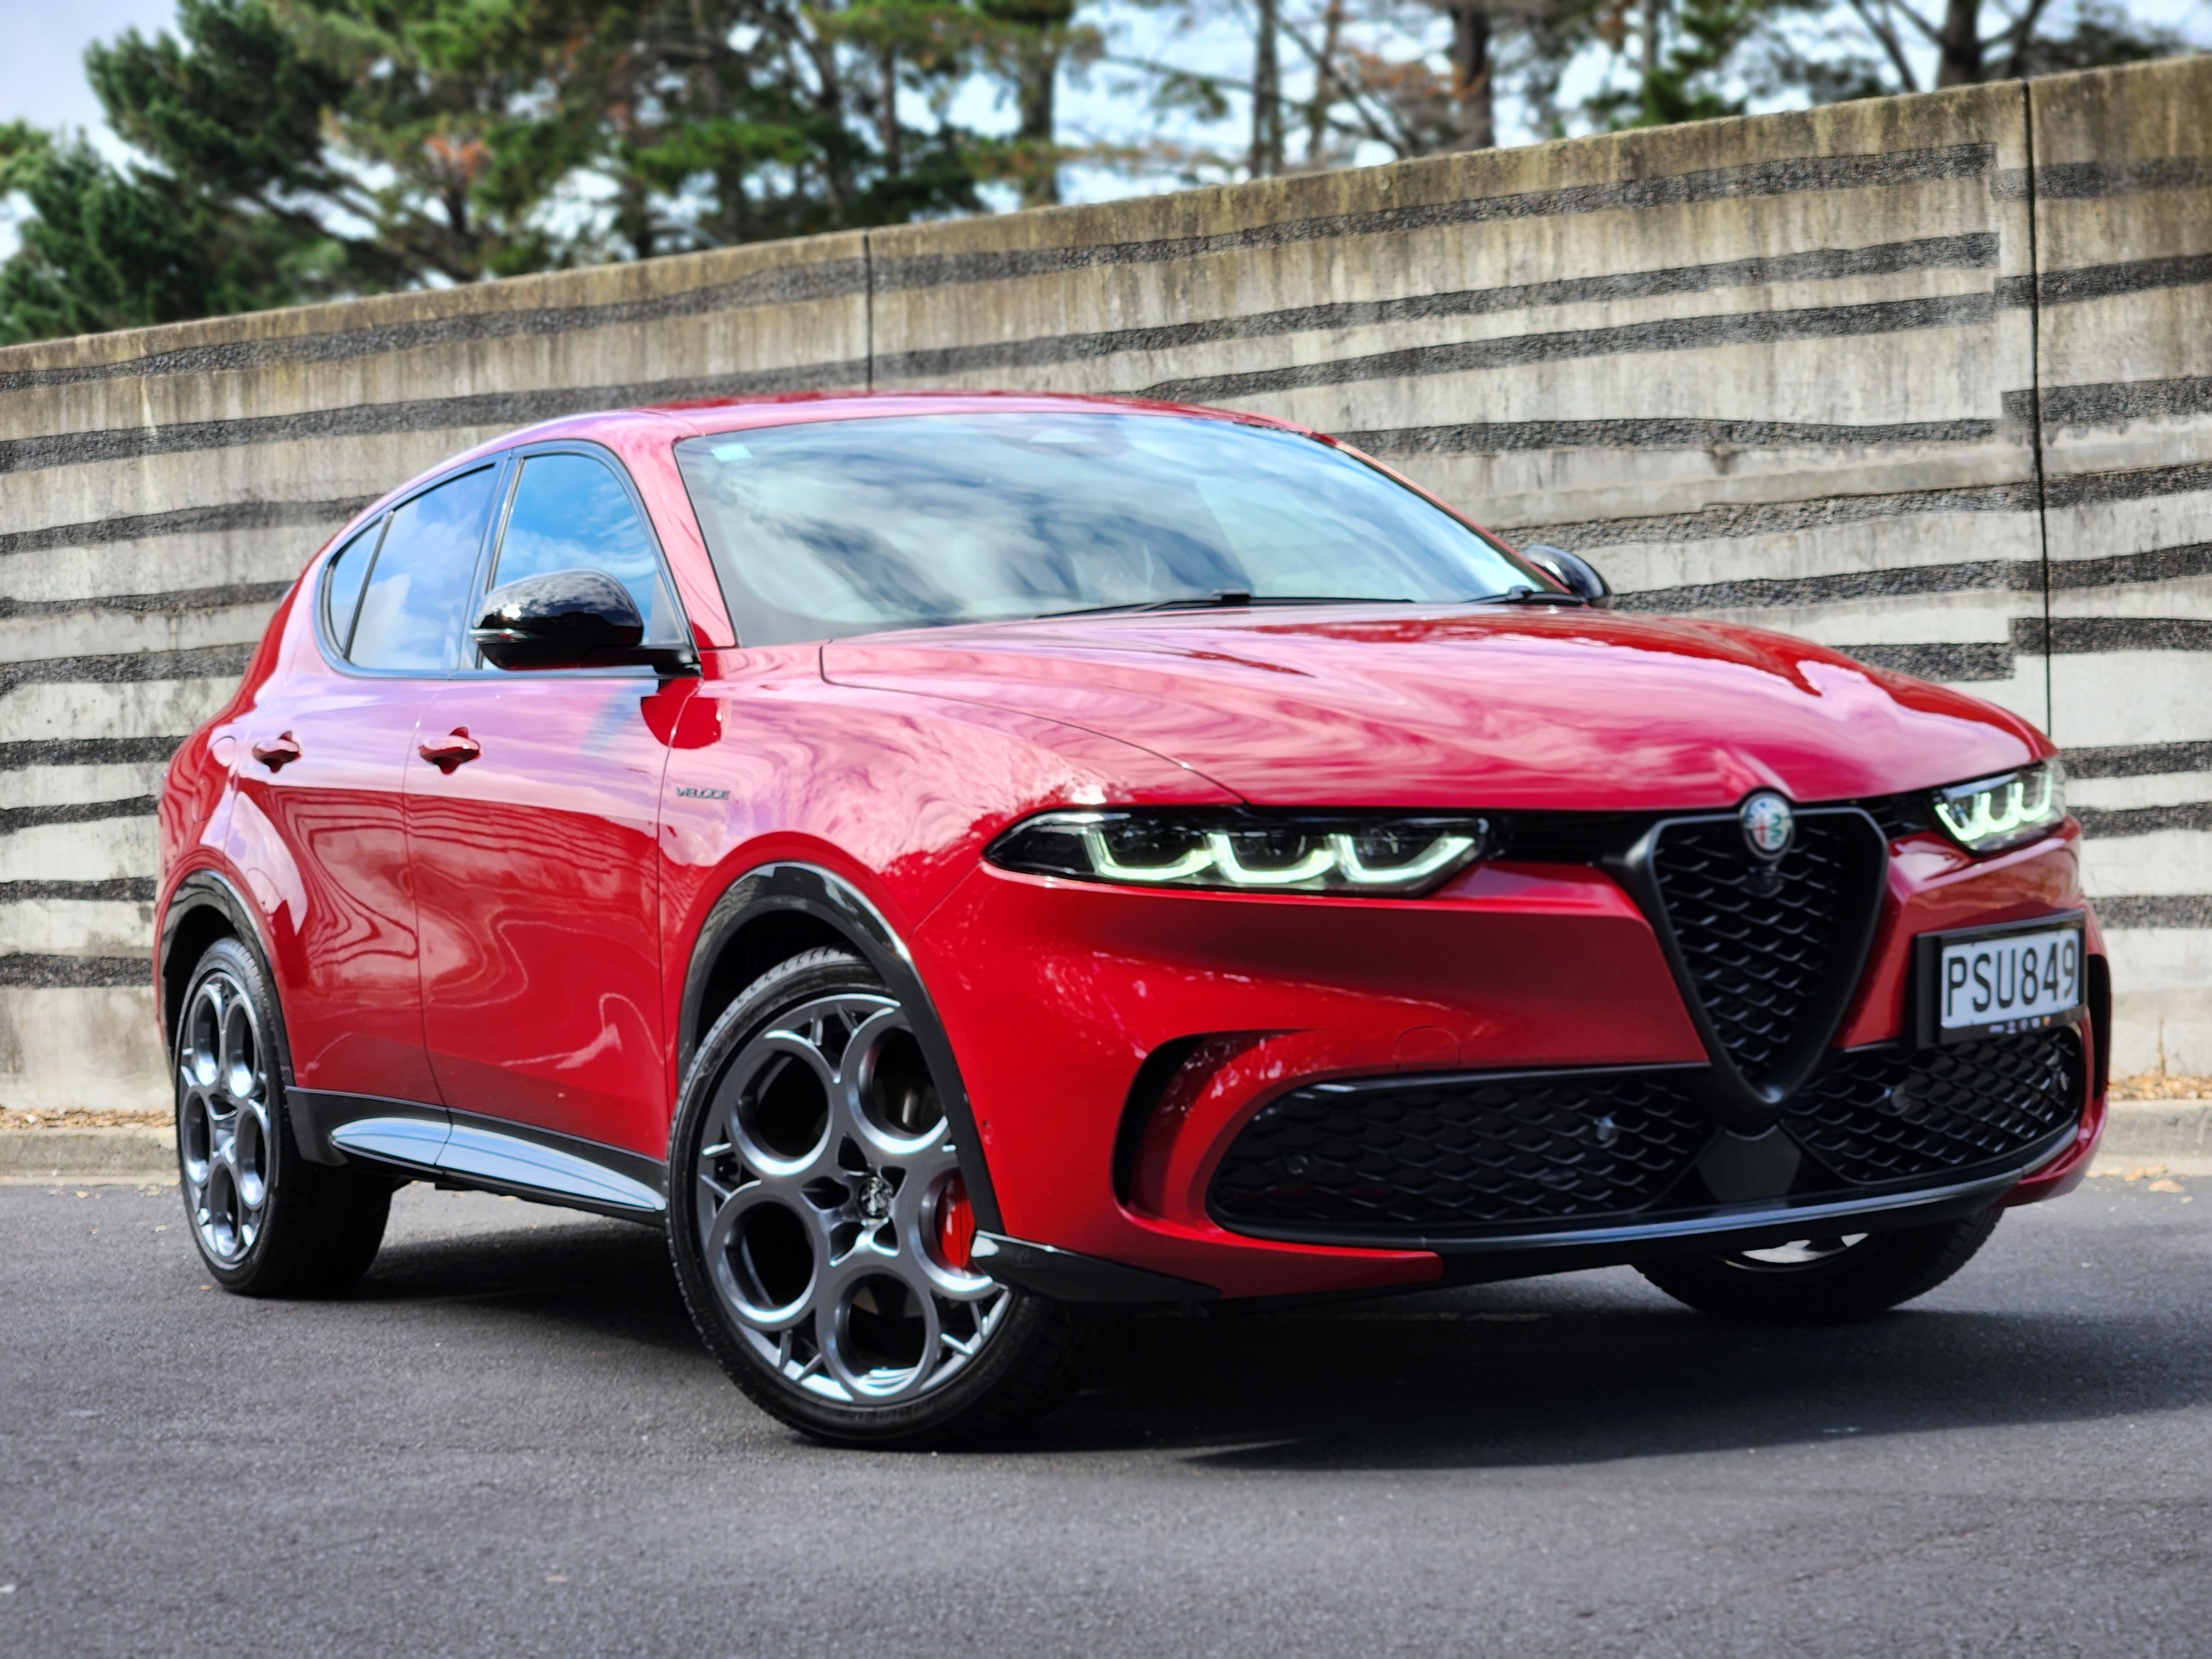 Alfa Romeo Tonale review: sparkling highs with a touch of di